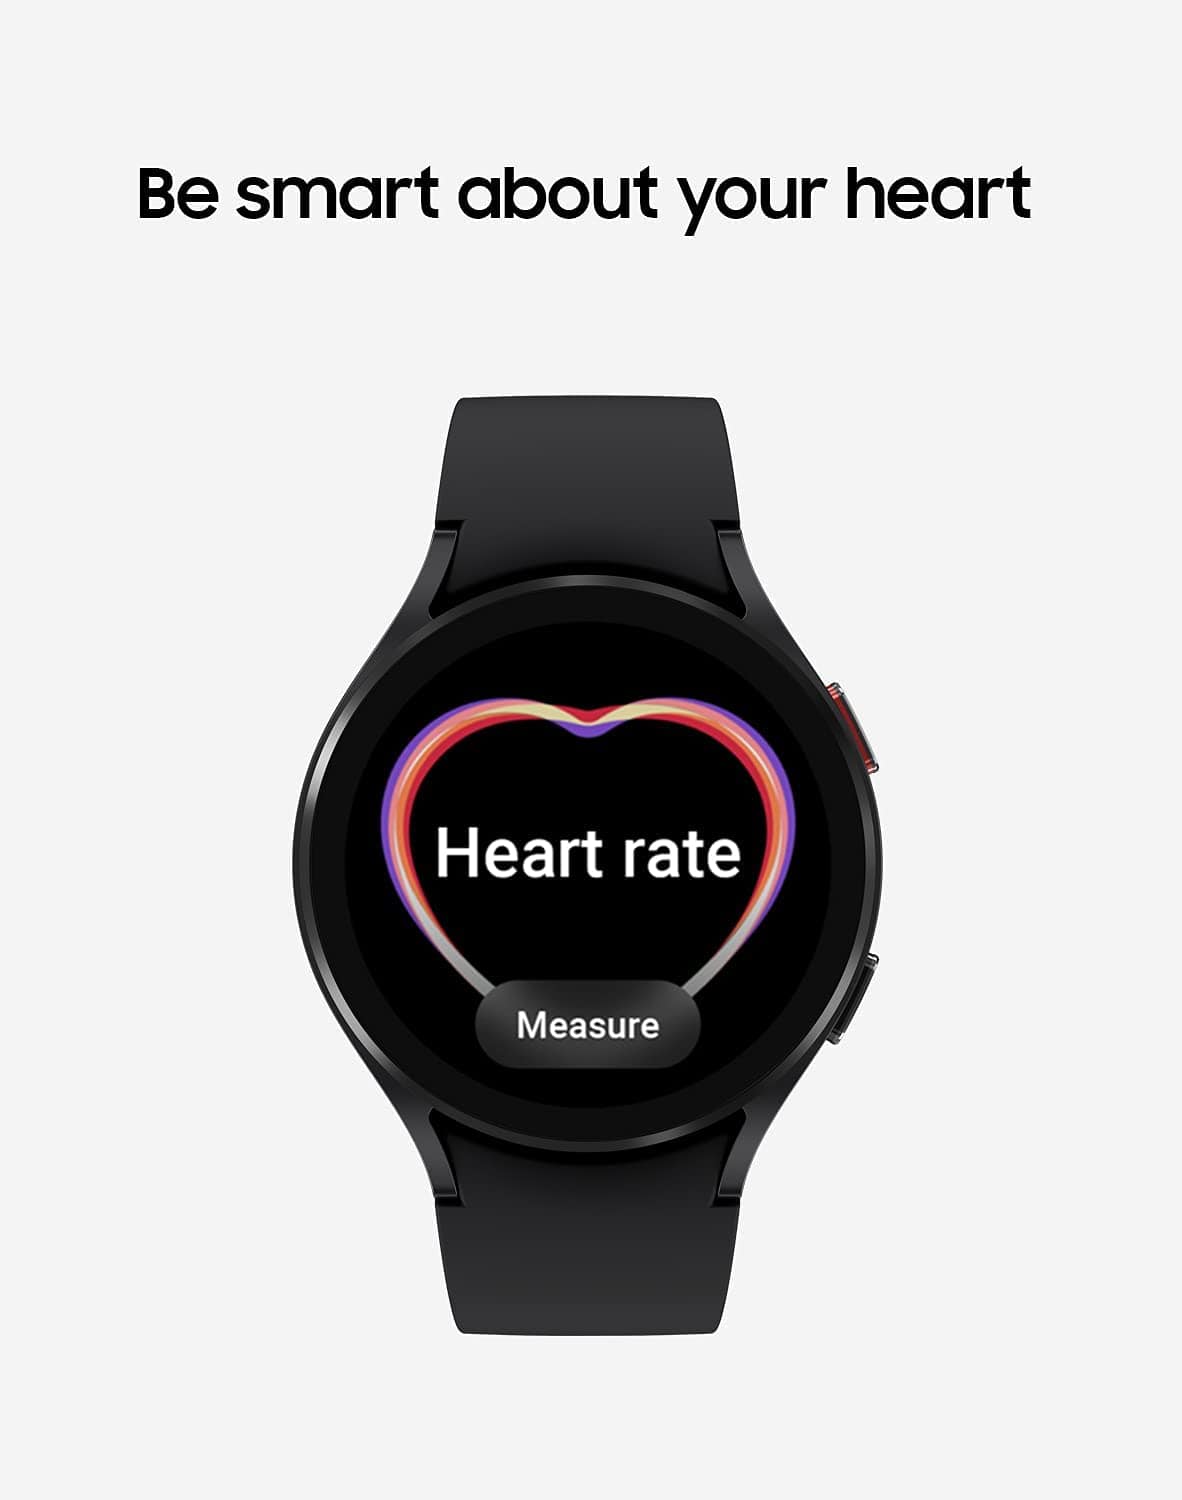 SAMSUNG Galaxy Watch 4, 40mm Smartwatch with ECG Monitor Tracker for Health, US Version - Smart Tech Shopping